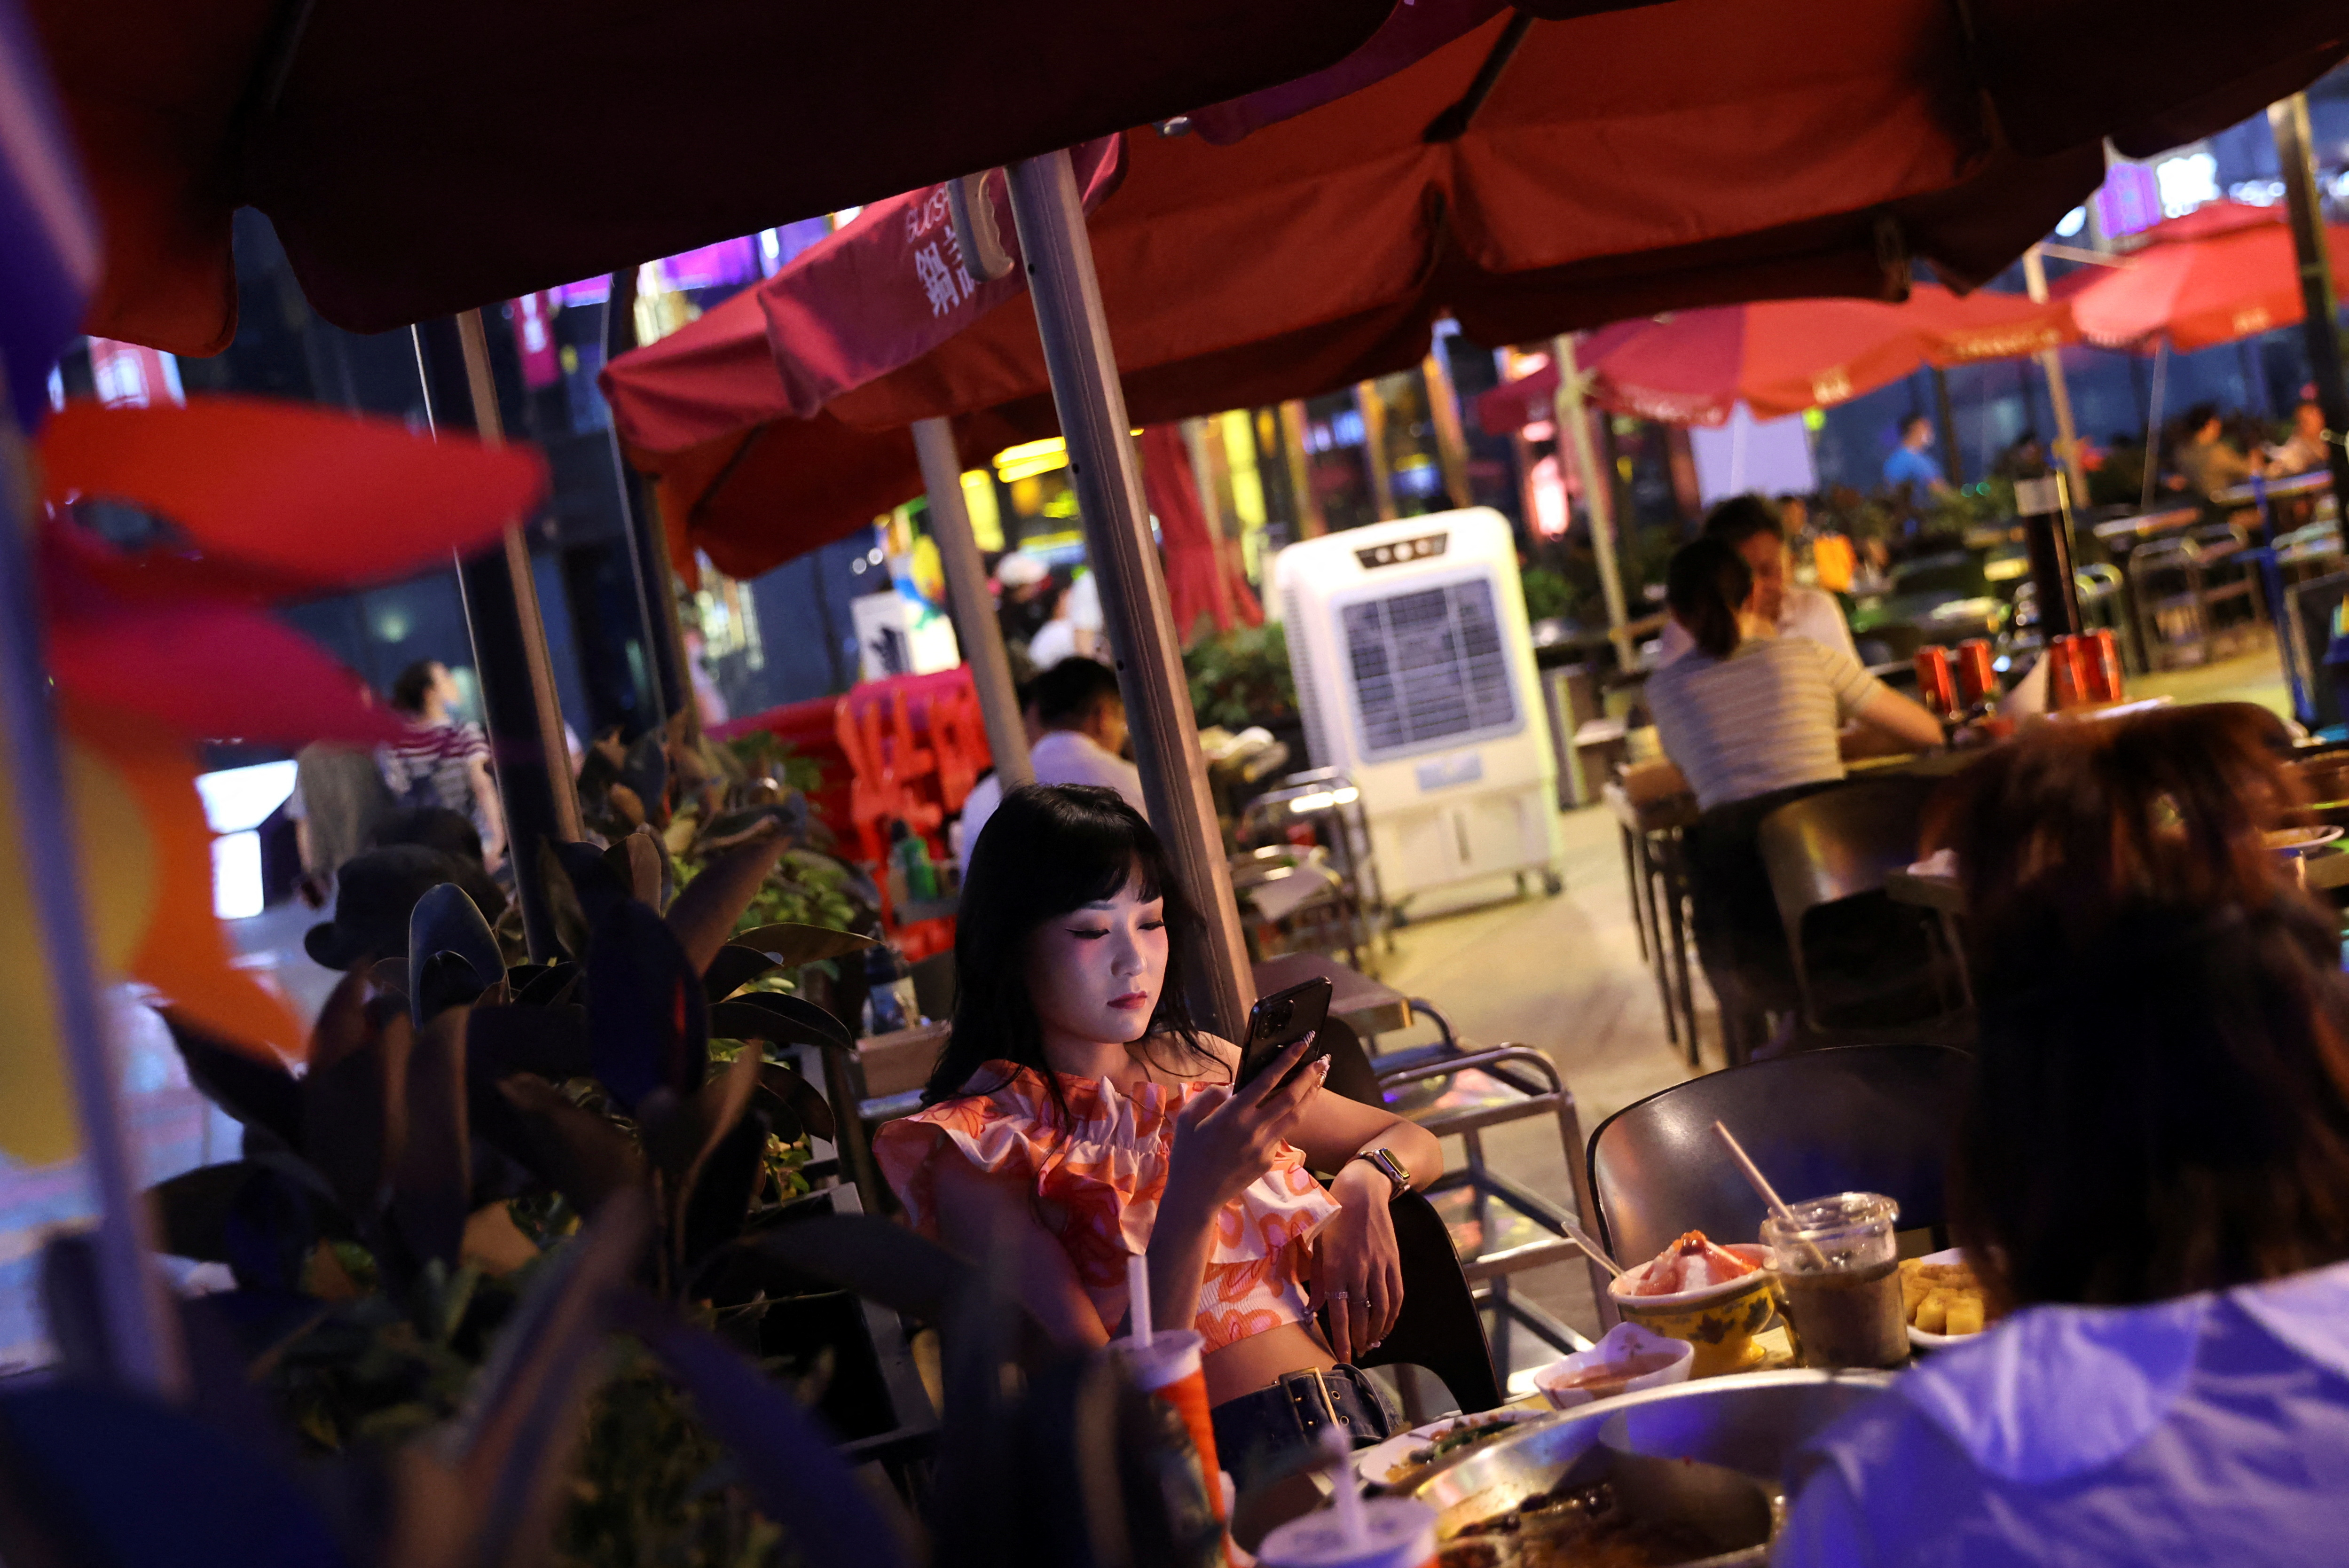 Customers dine at a restaurant at a shopping area in Beijing